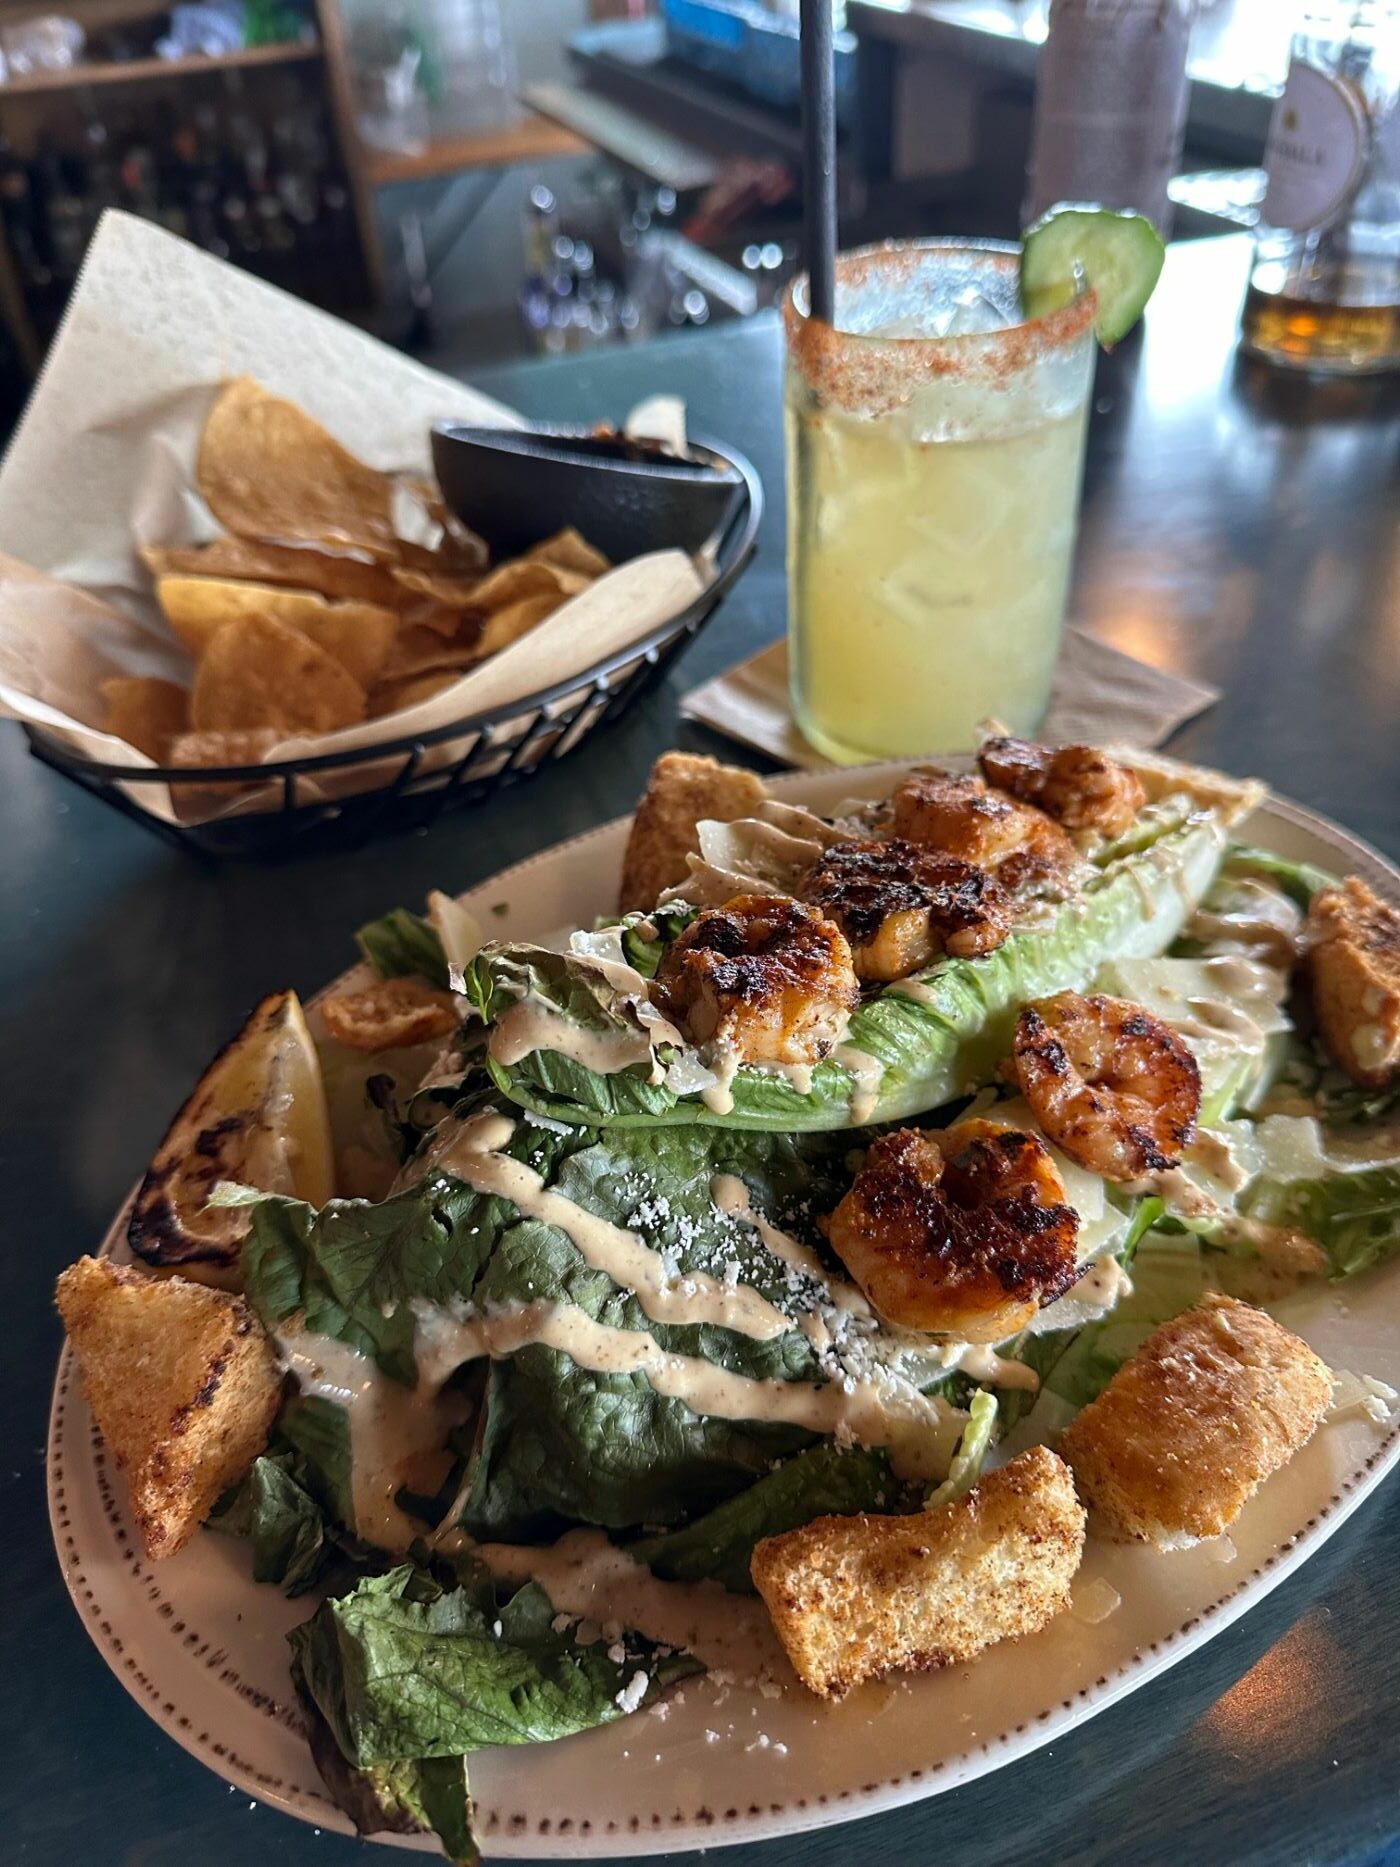 An image of the Caesar Salad with Shrimp and Spicy Margarita from Tamarindo Del Mar.